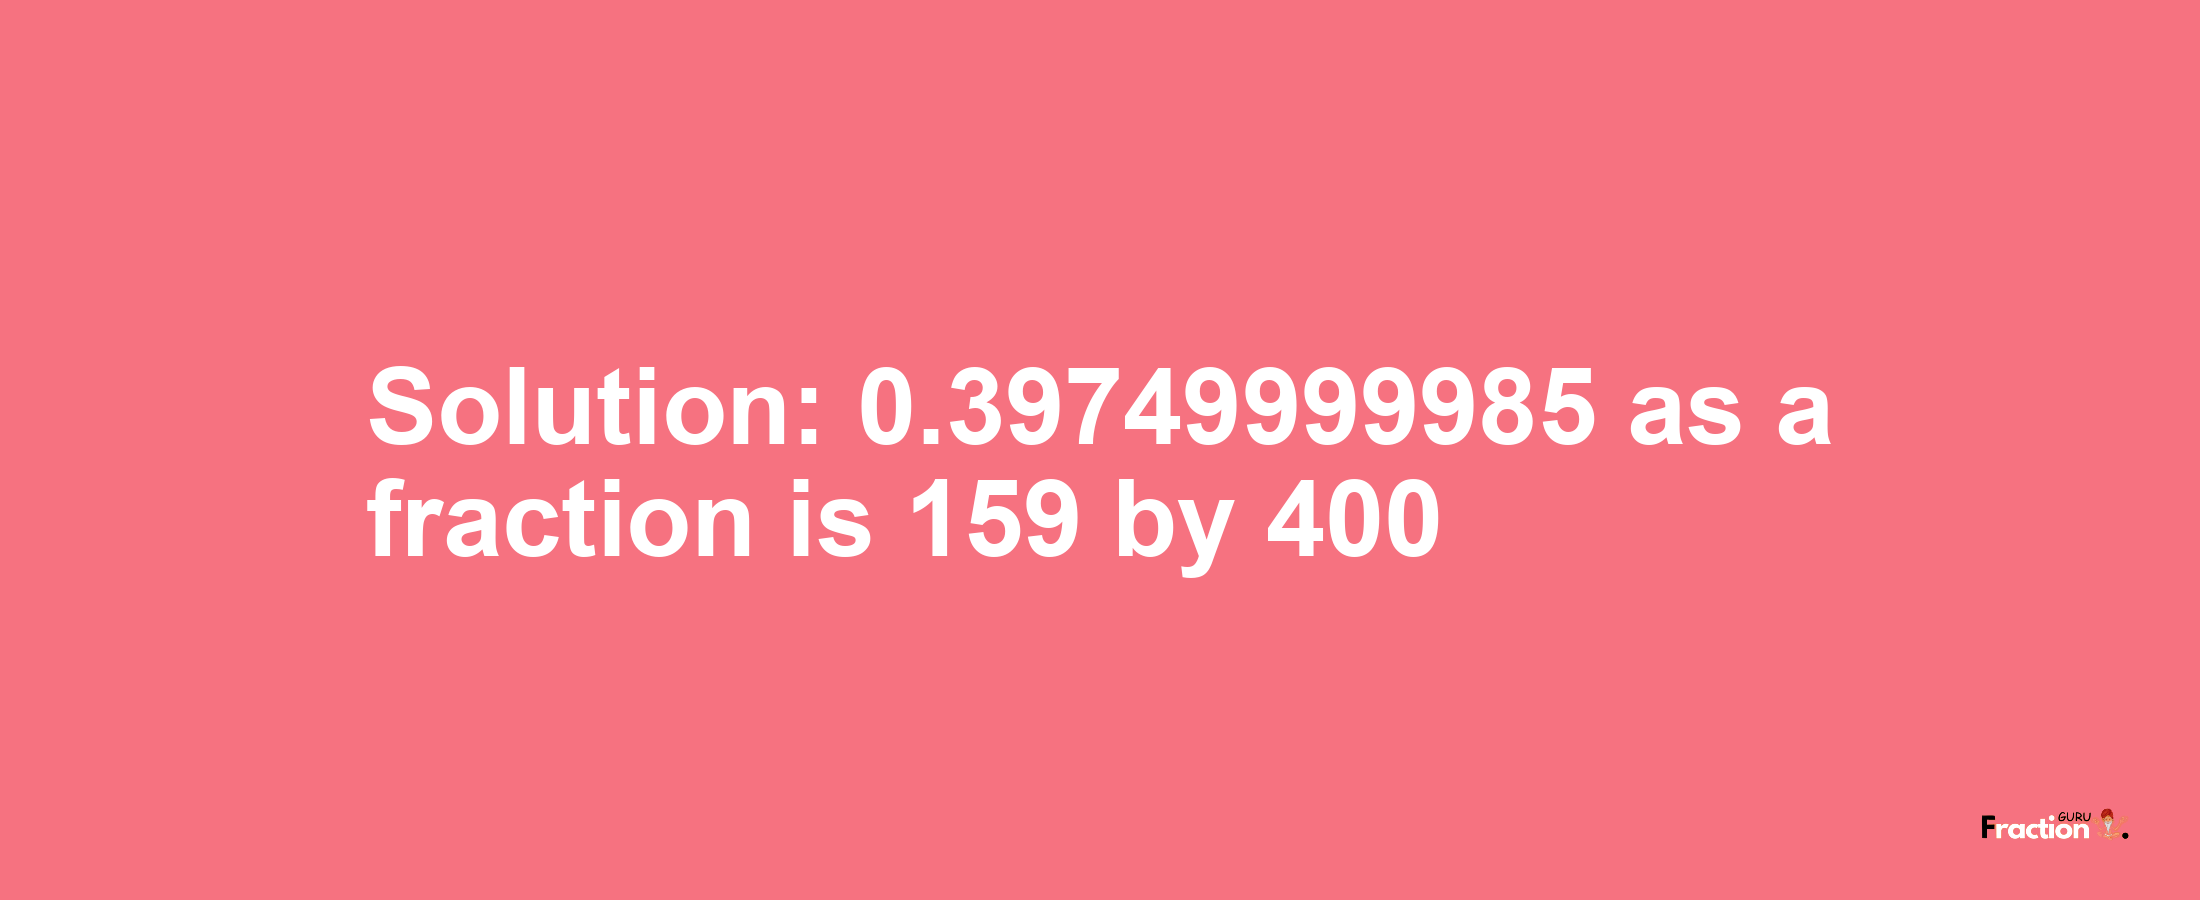 Solution:0.39749999985 as a fraction is 159/400